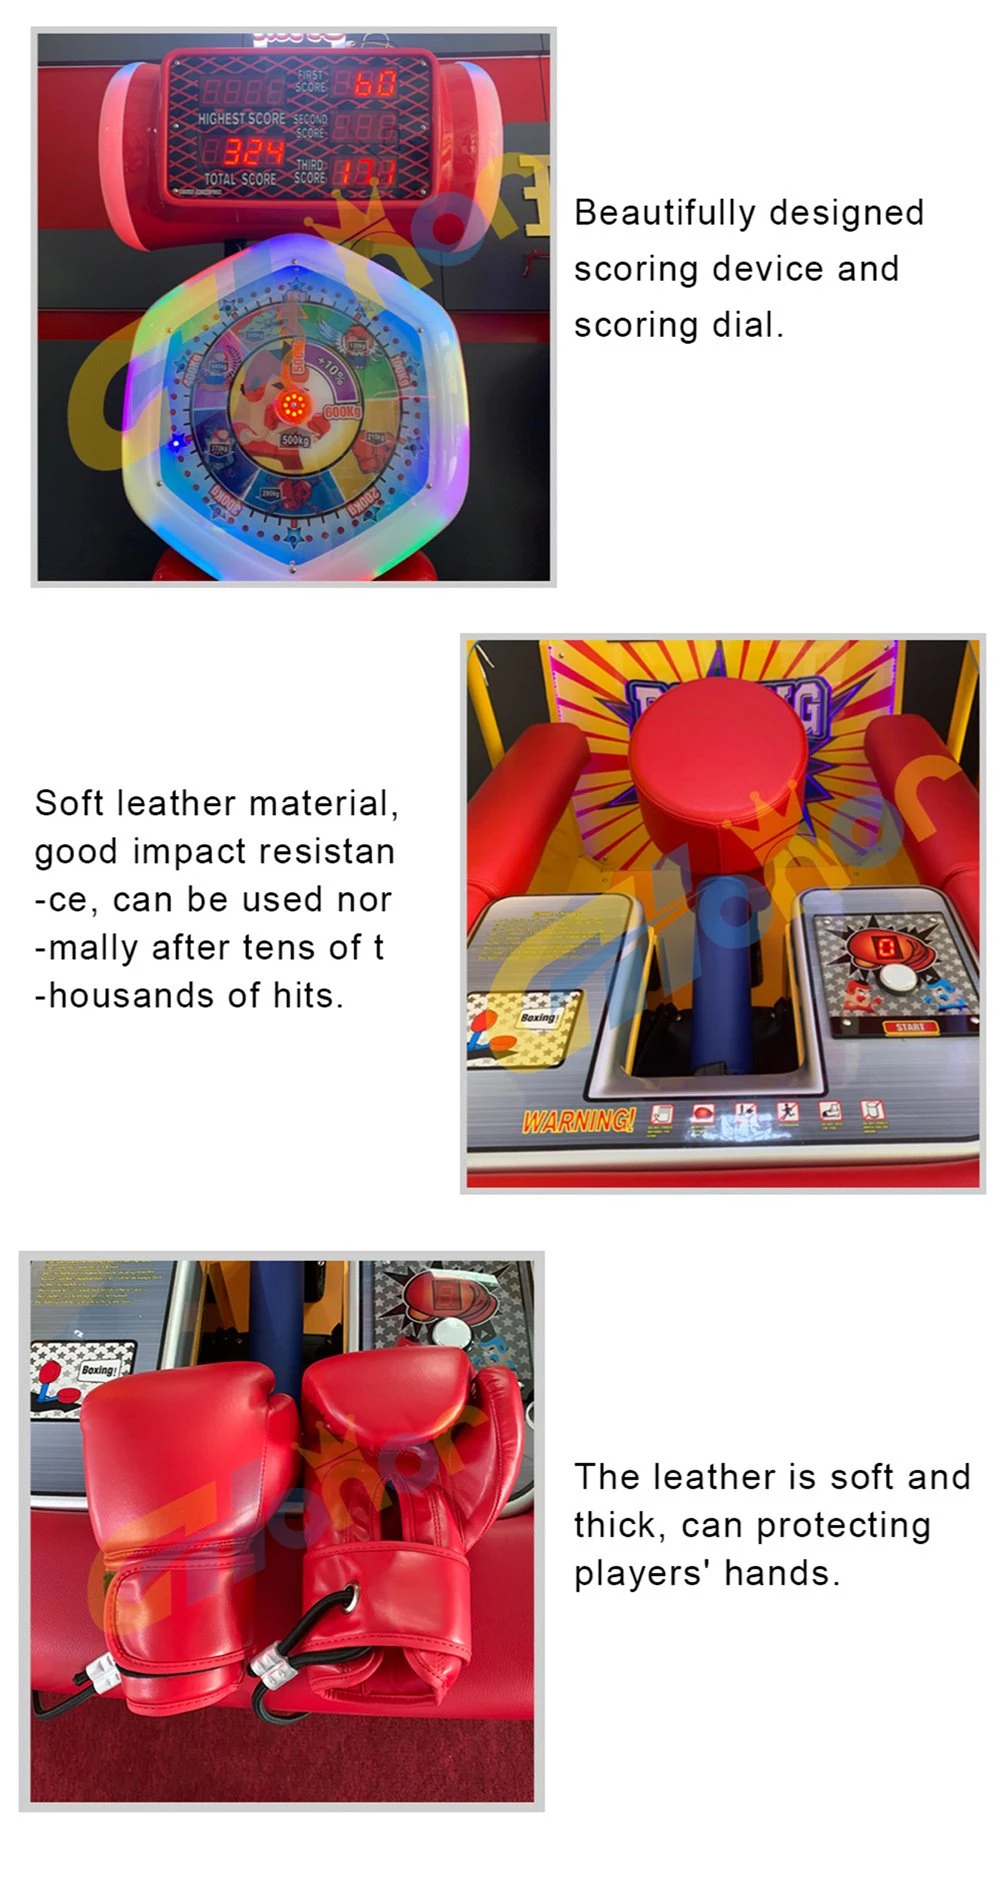 Hot Selling Coin Operated Punch Boxing Game Arcade Sport Game Machine Arcade Punch Game Arcade Street Boxing Game Player Arcade Game Machine